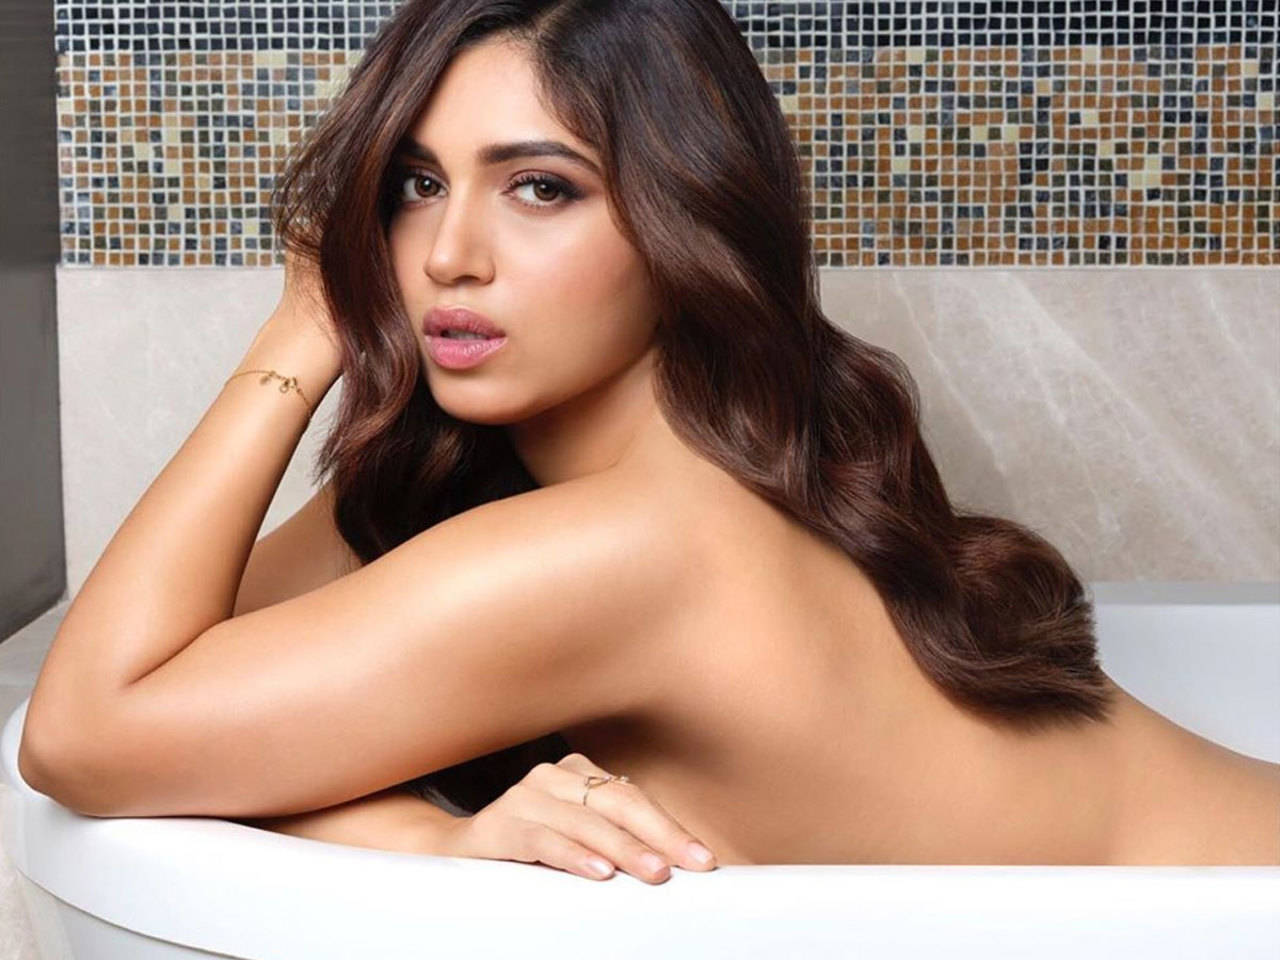 Bhumi Pednekar dares to bare all in a 'sensuous' shoot for Dabboo Ratnani's  calendar | Hindi Movie News - Times of India